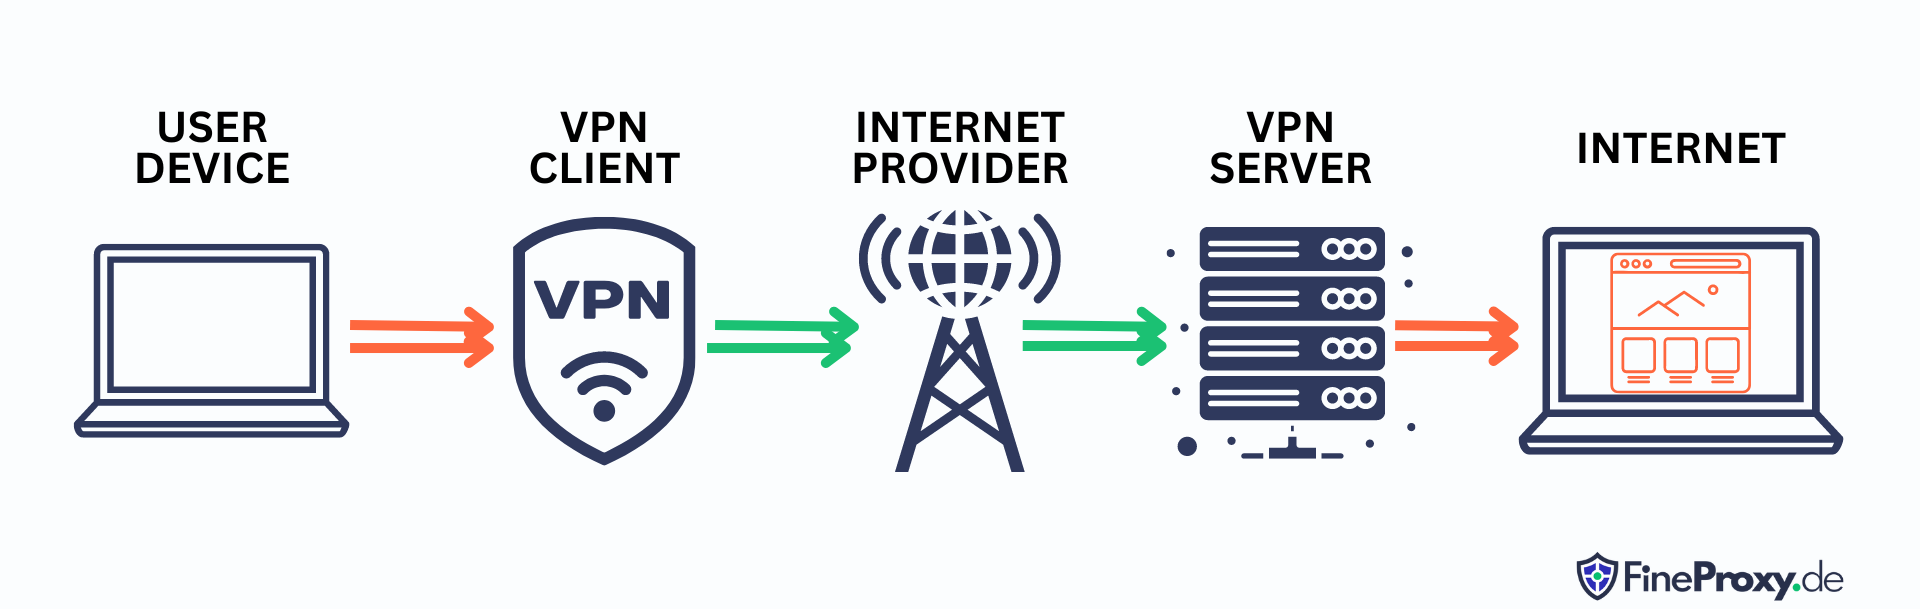 How Does a VPN Service Work?